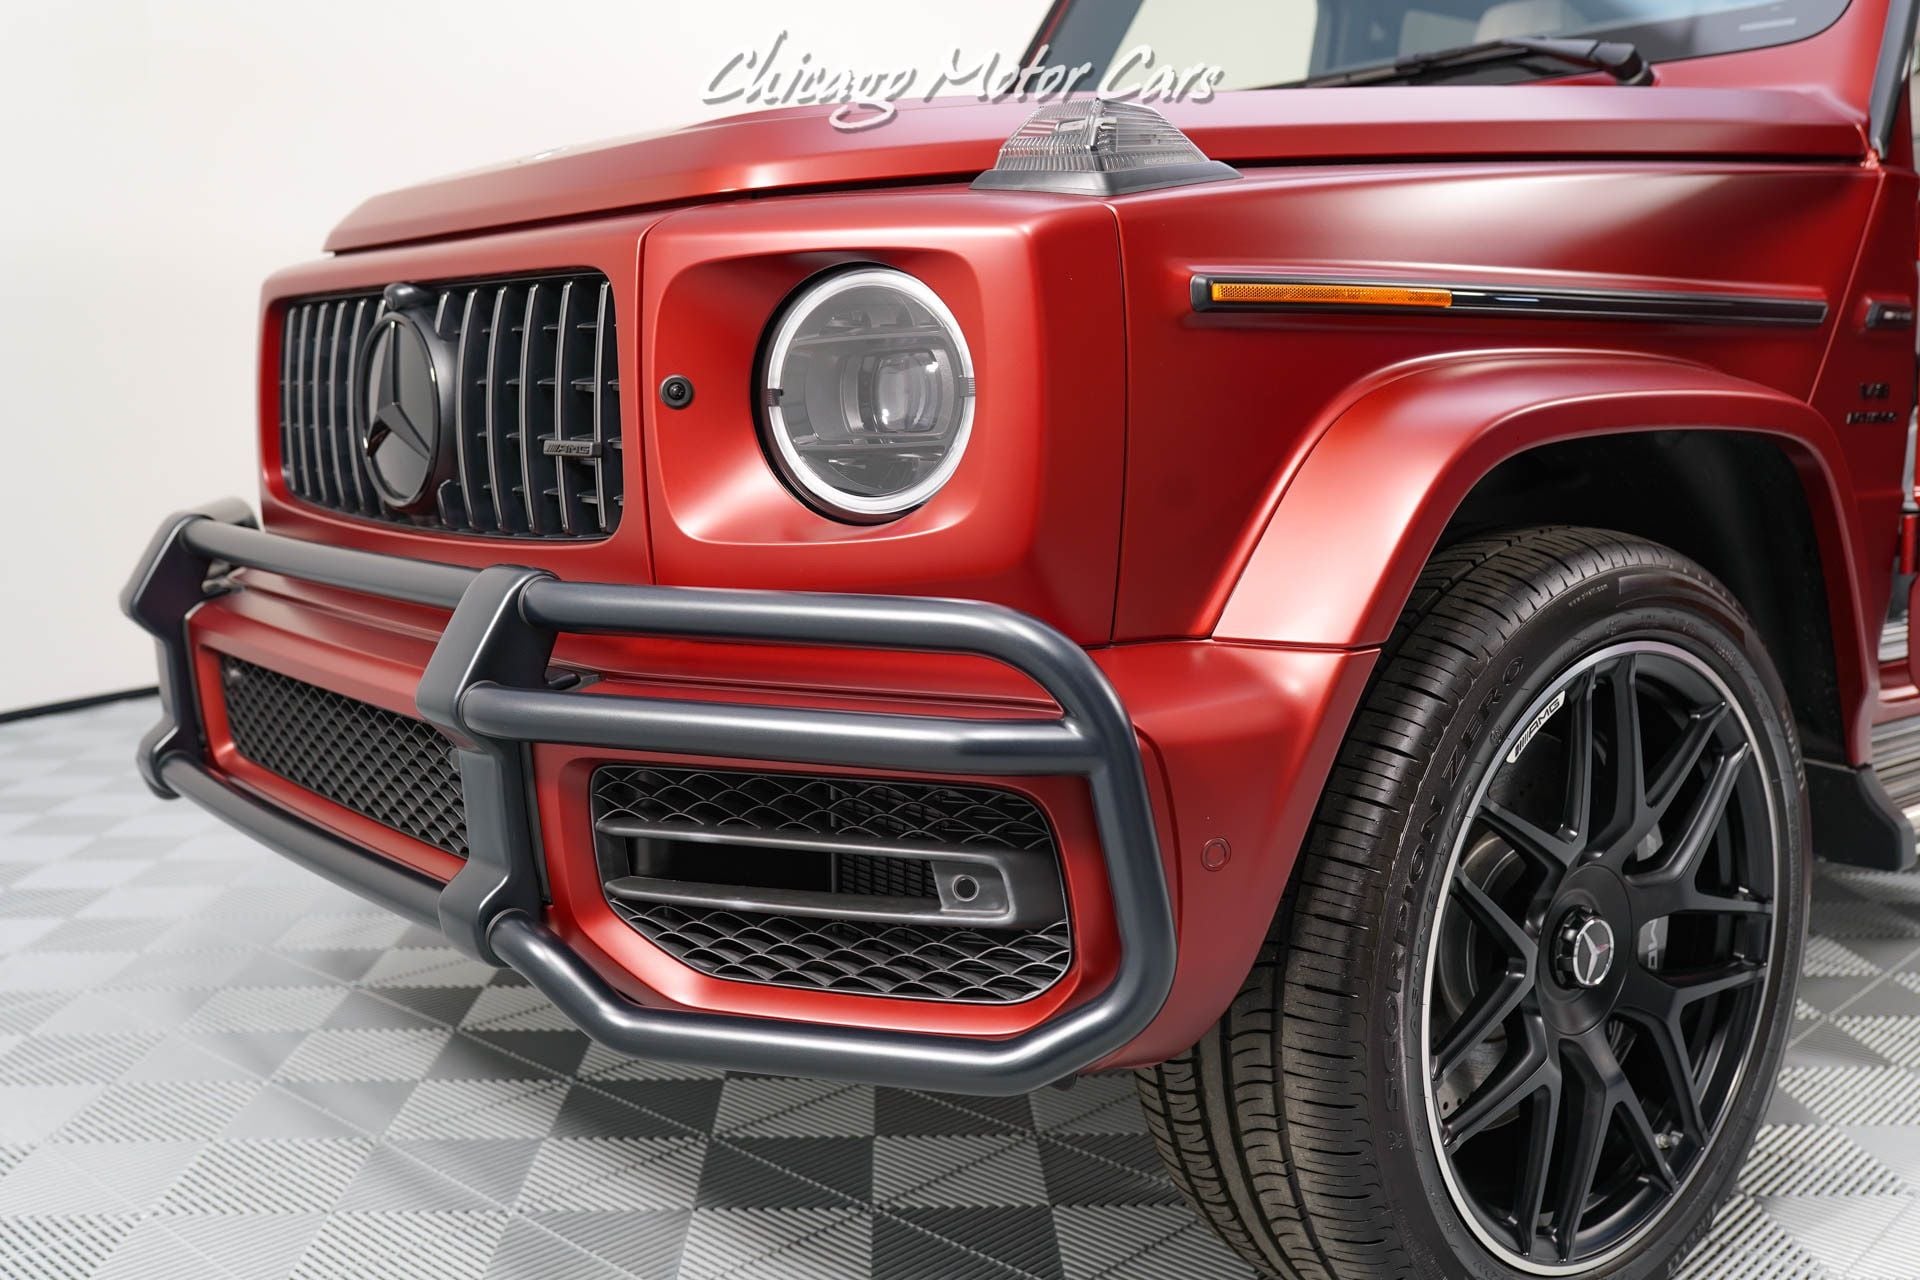 2023 - 2024 Mercedes-Benz G-Class - Want to buy 2023 - 2025 G63 AMG - New or Used - Summit, NY 07901, United States